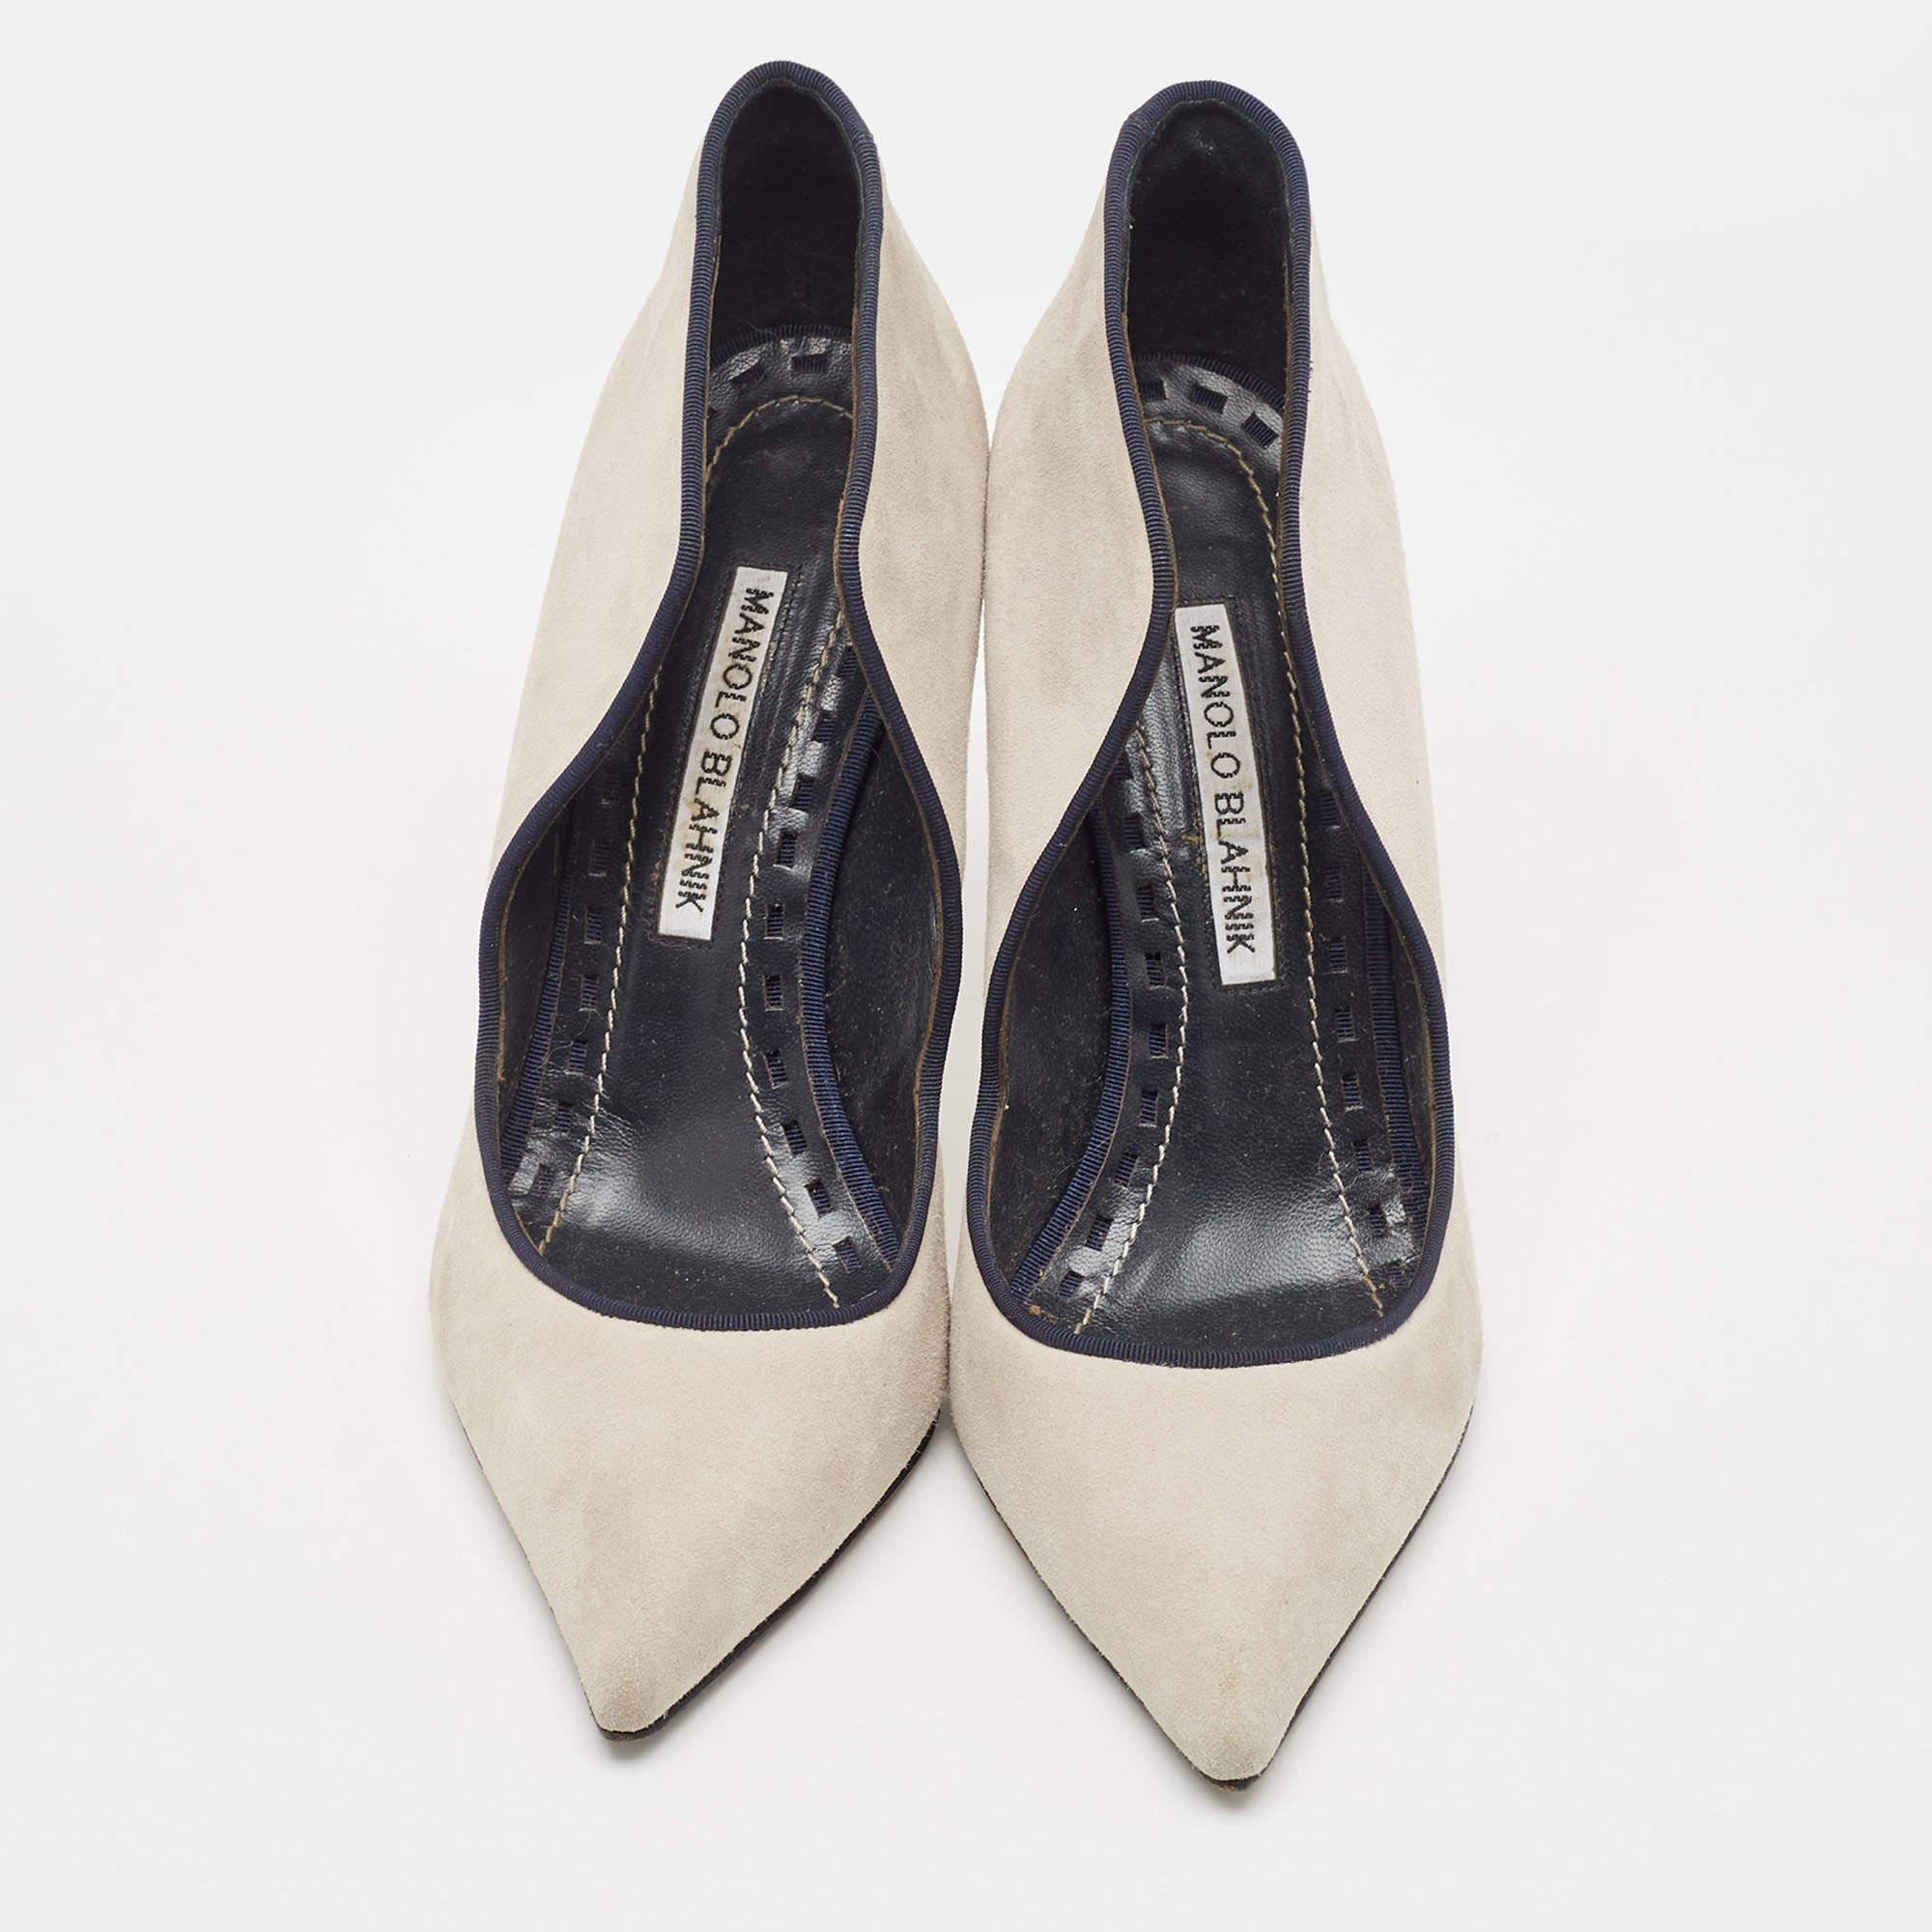 Manolo Blahnik Grey Suede Pointed Toe Pumps Size 36.5 For Sale 3